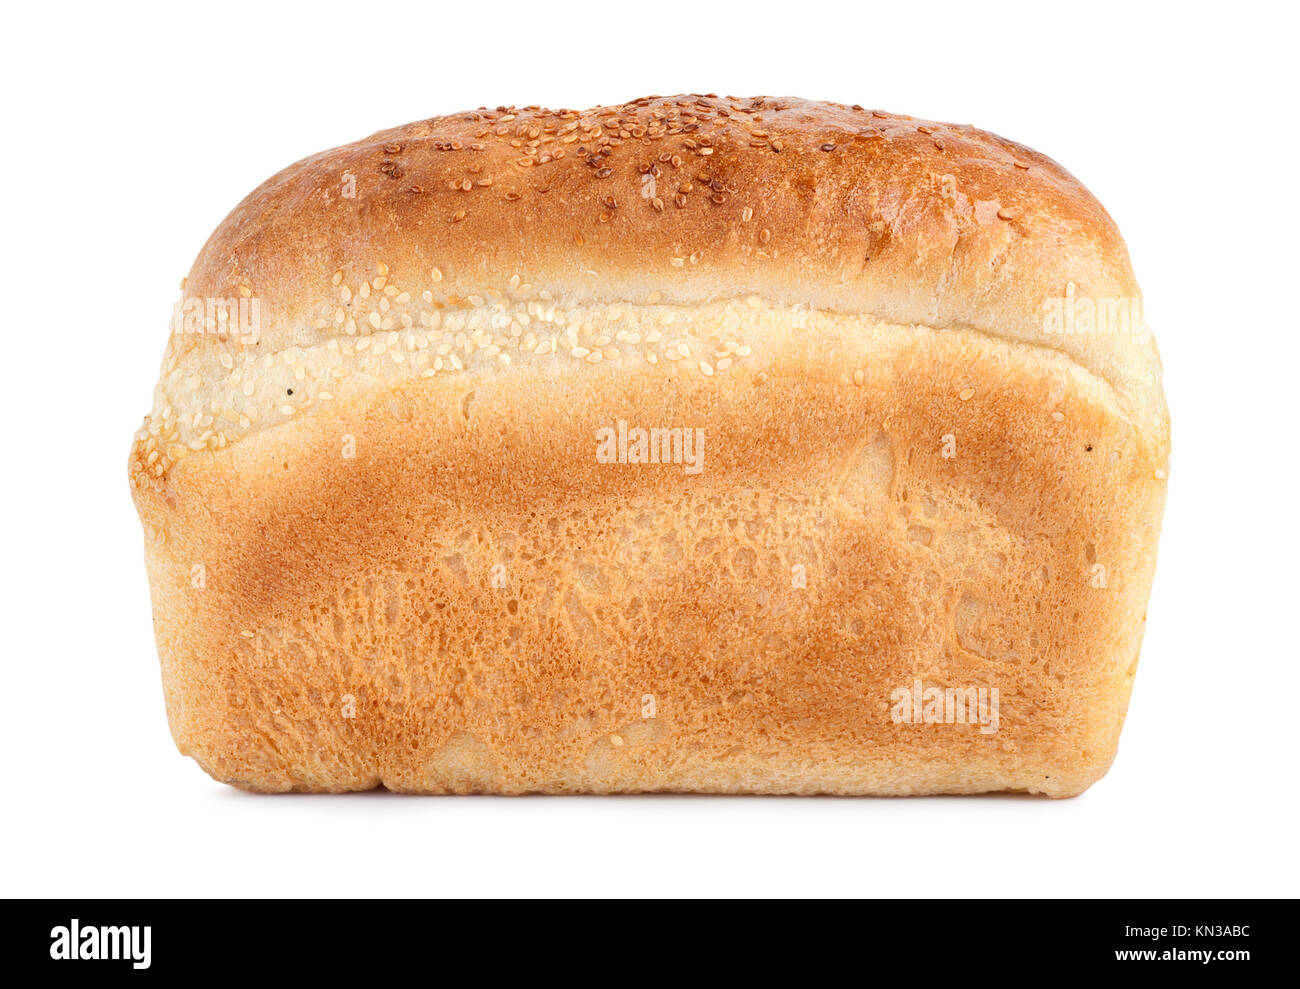 Loaf of Bread isolated on white background. Stock Photo